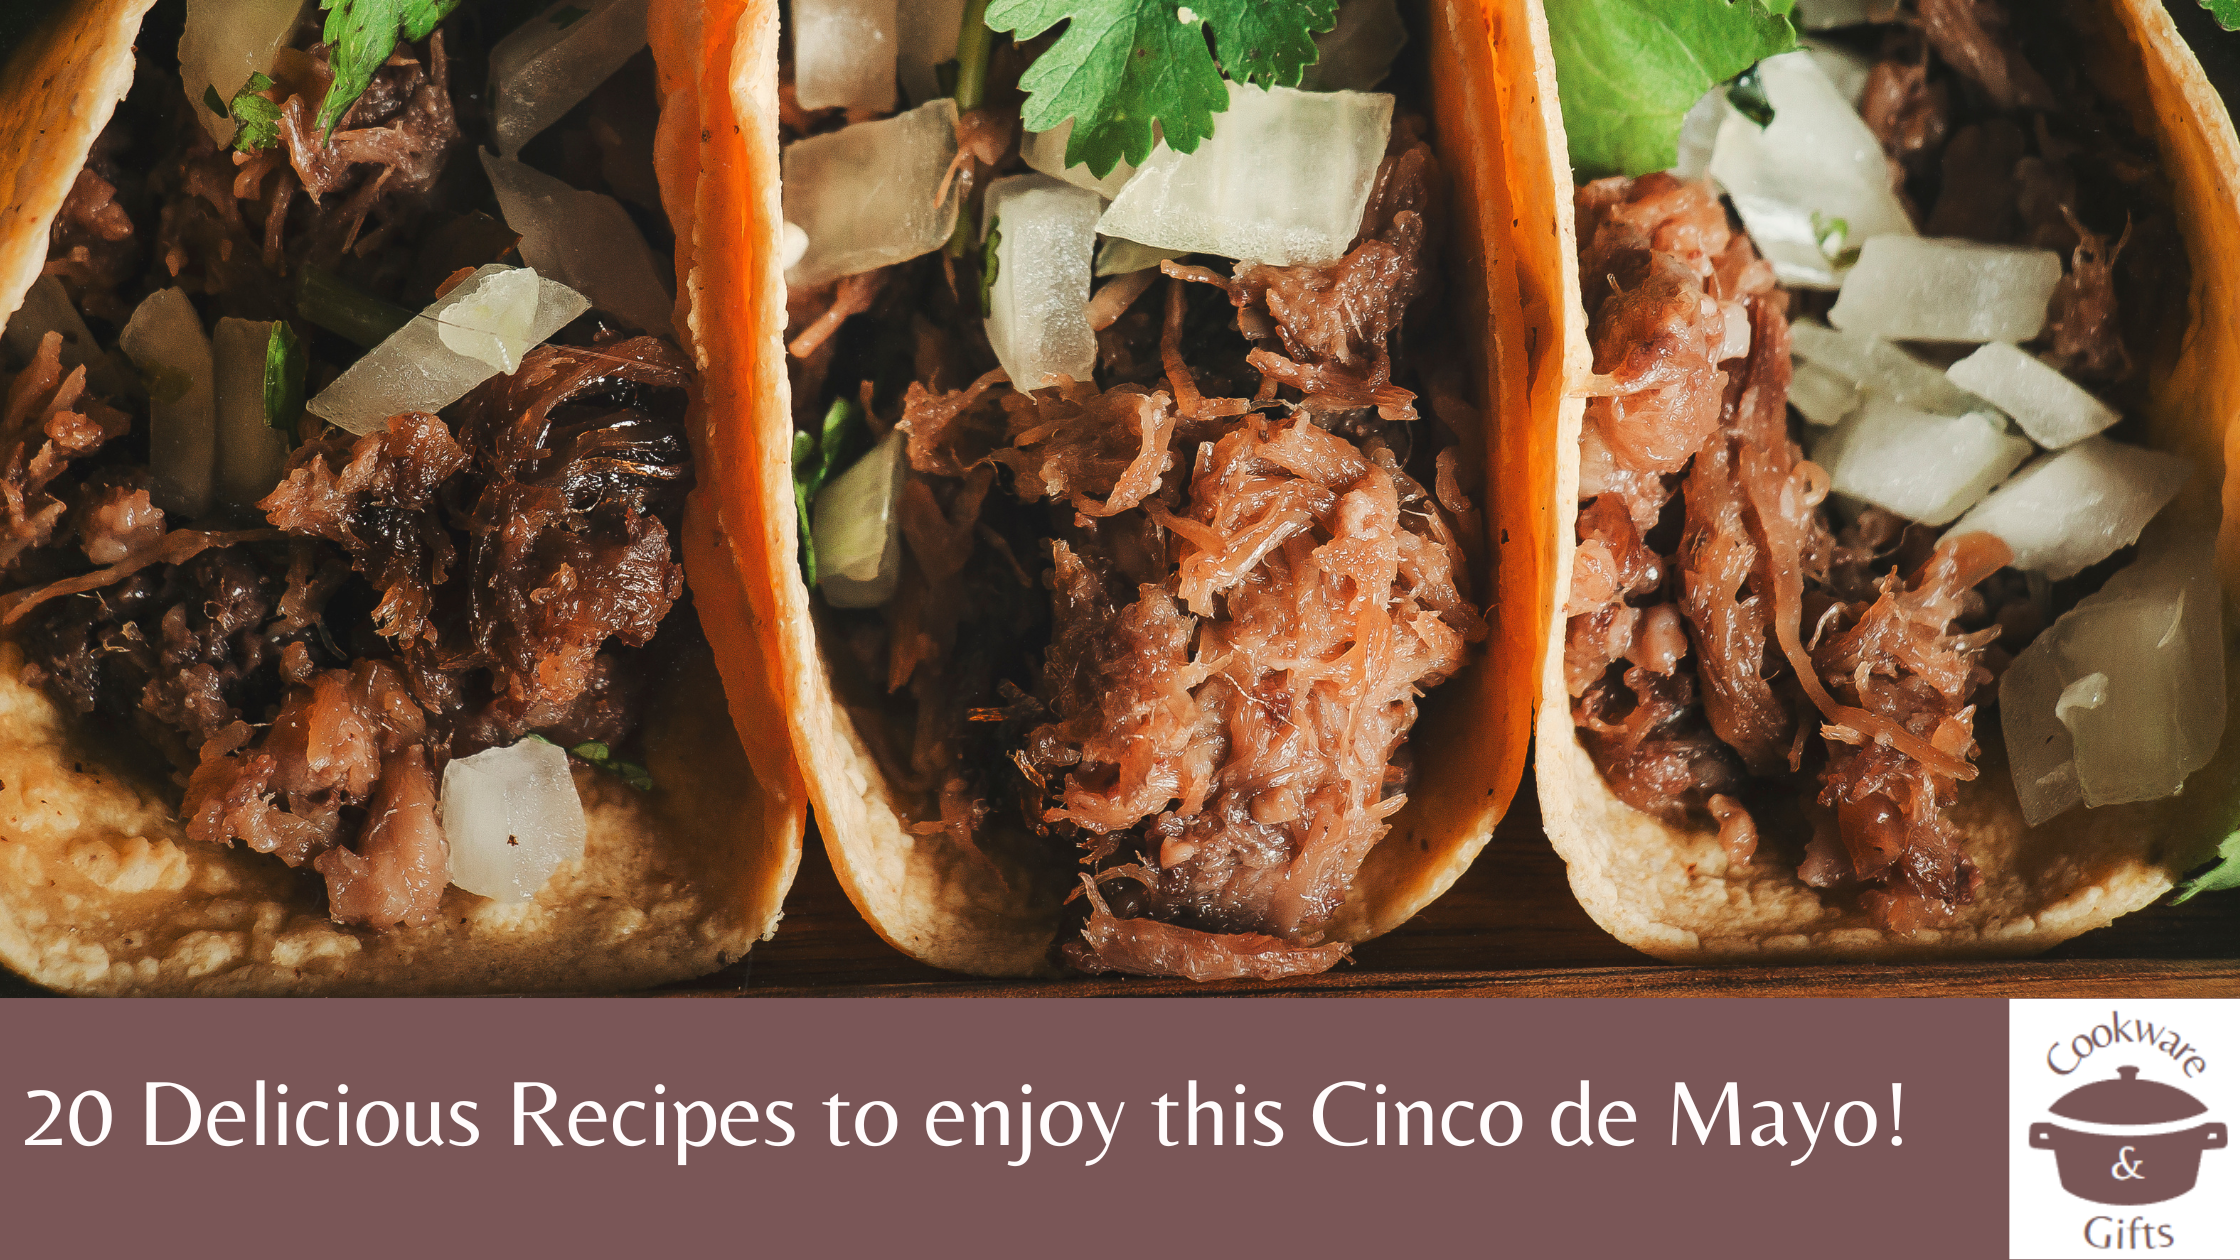 20 Delicious Recipes that will make your Cinco de Mayo unforgettable! 🌮🎊